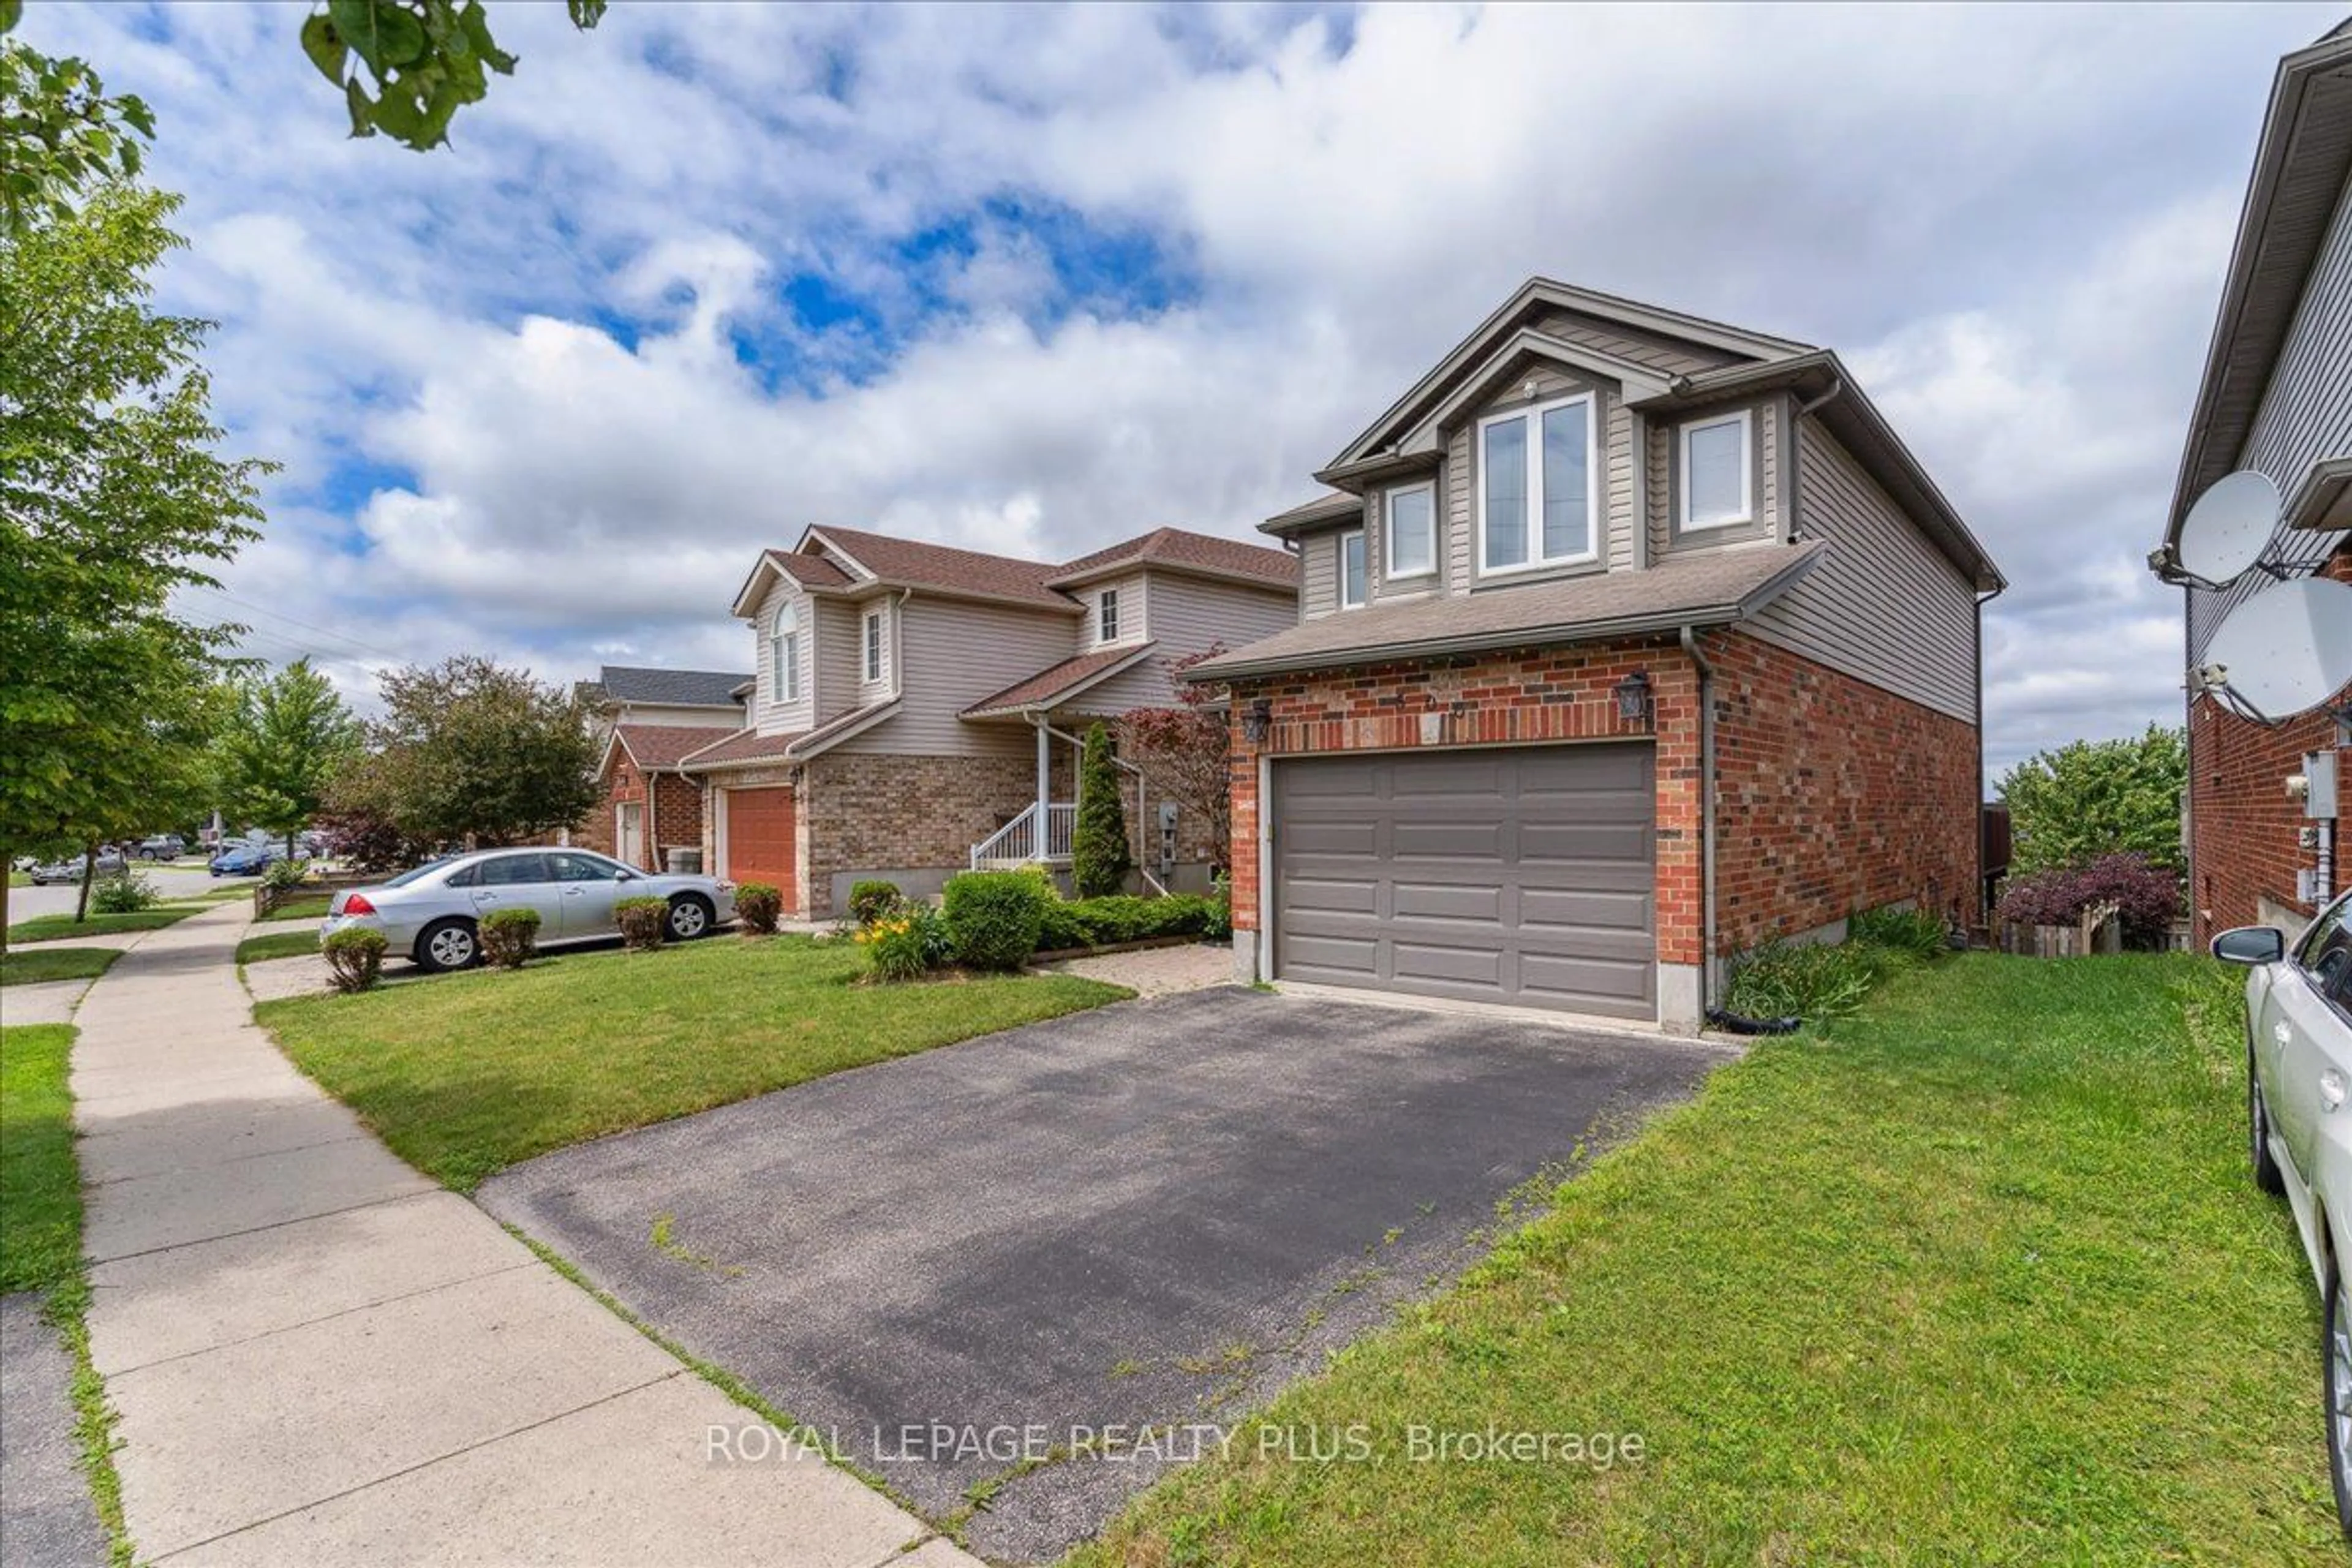 Frontside or backside of a home for 506 Activa Ave, Kitchener Ontario N2E 4C1